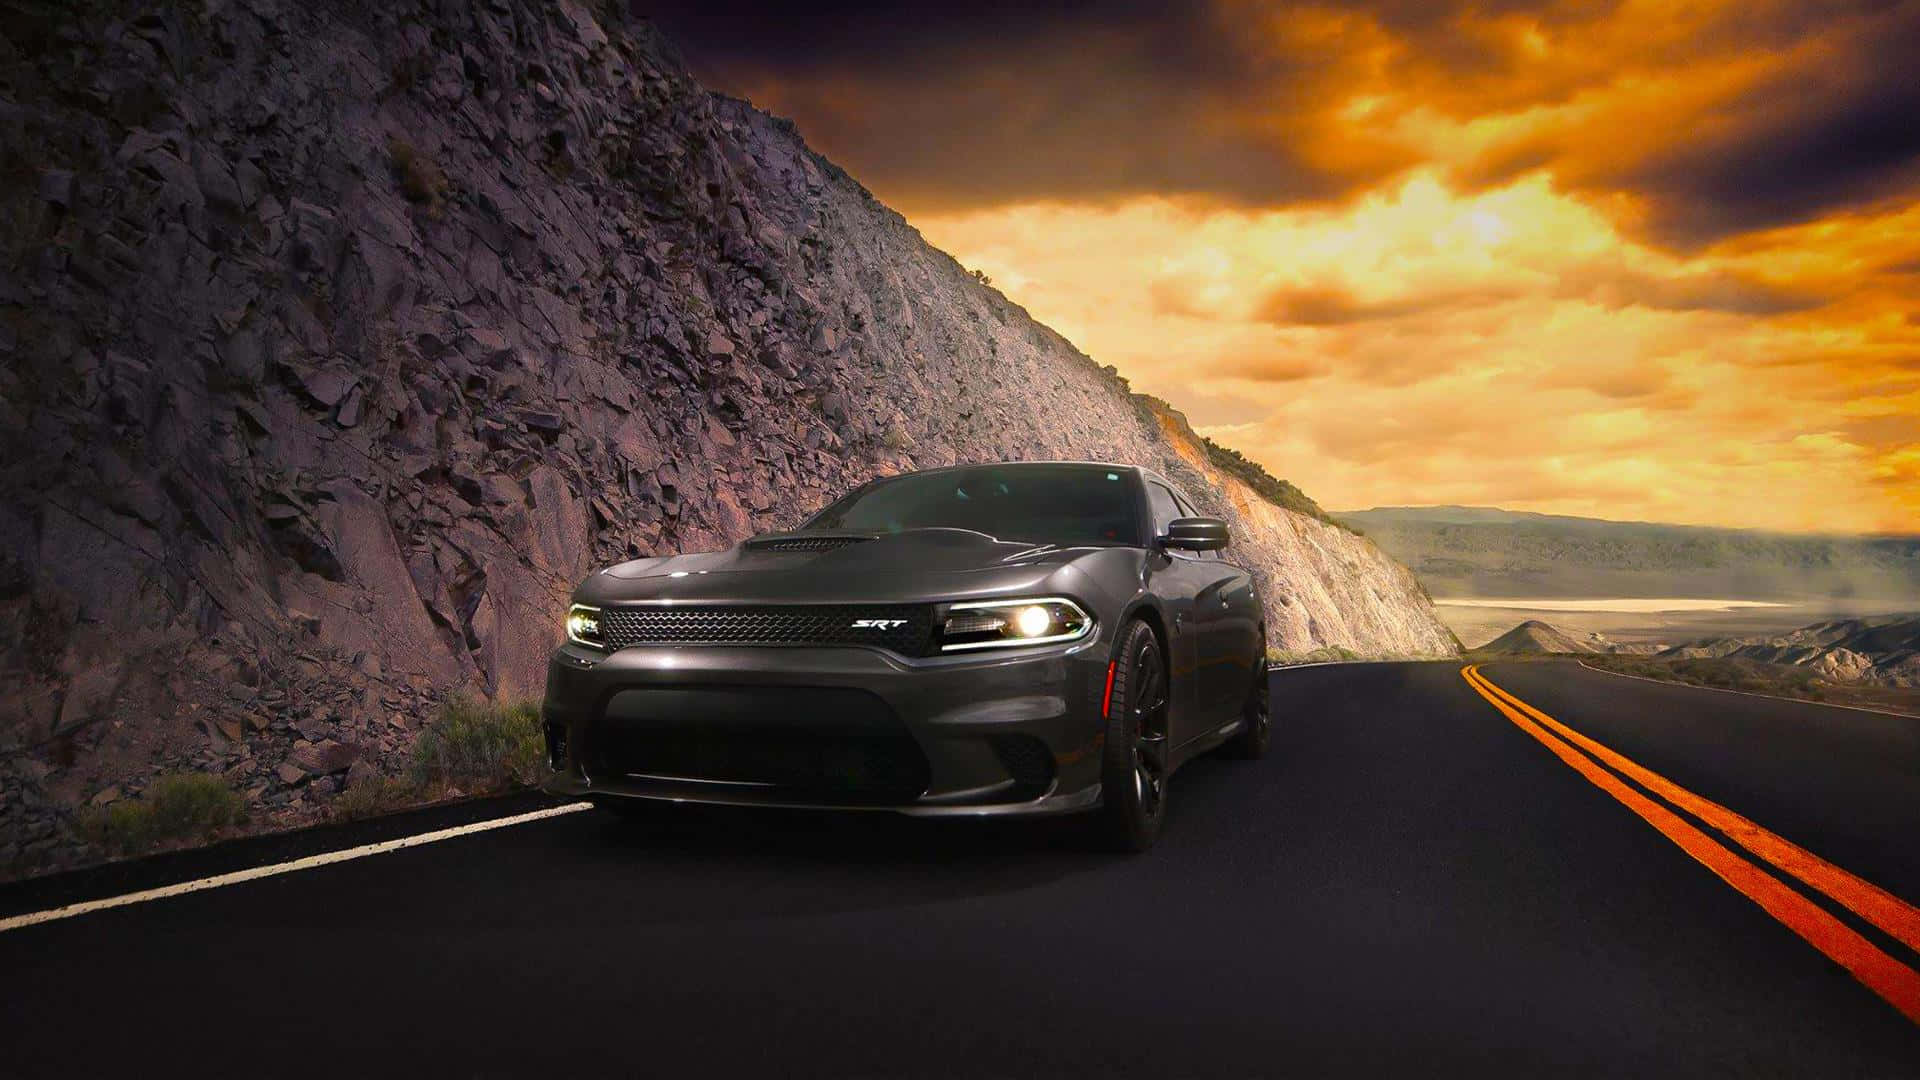 Dodge_ Charger_ S R T_ On_ Mountain_ Road Wallpaper